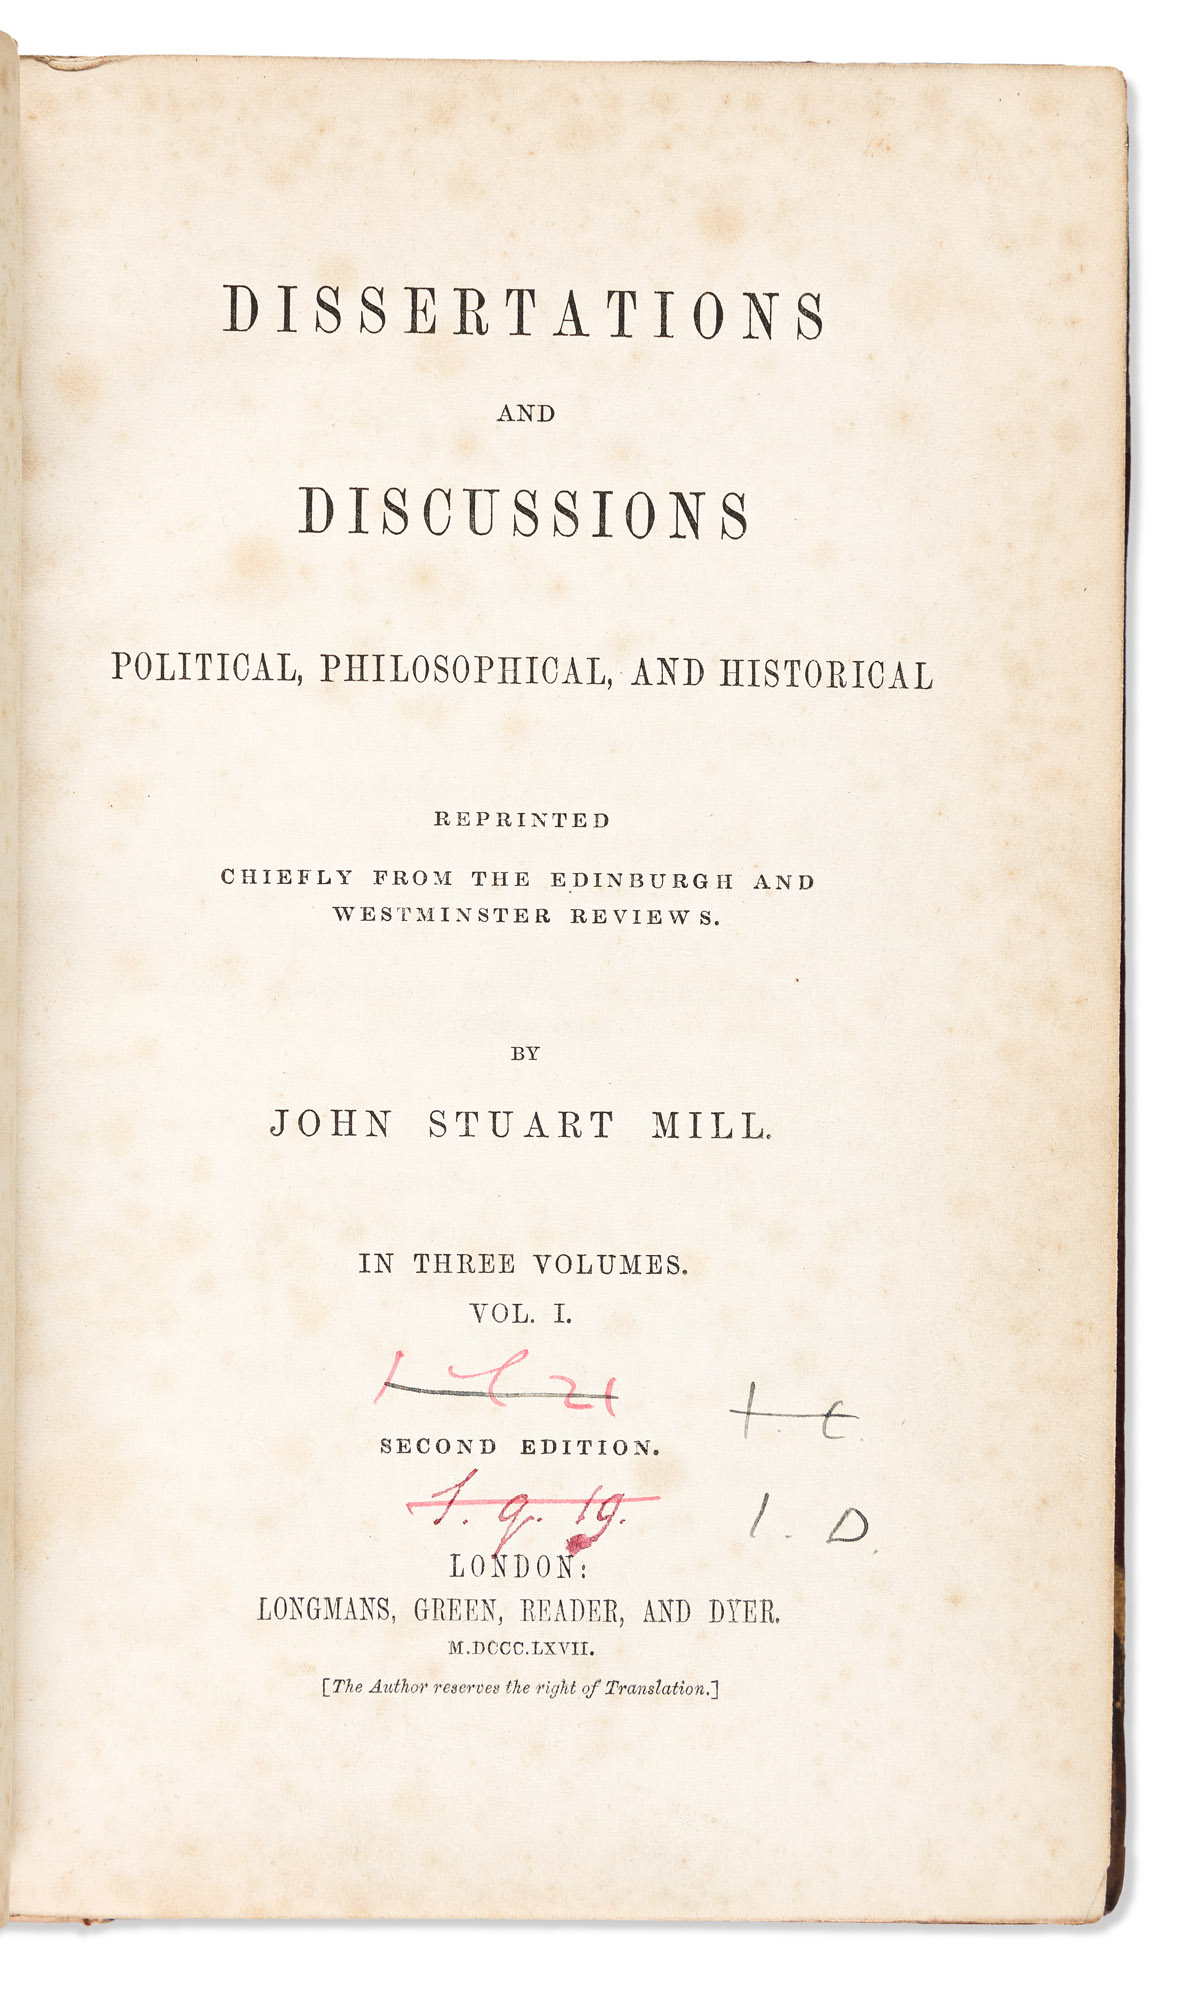 [Economics] Mill, John Stuart (1806-1873) Dissertations and Discussions Political, Philosophical, and Historical.